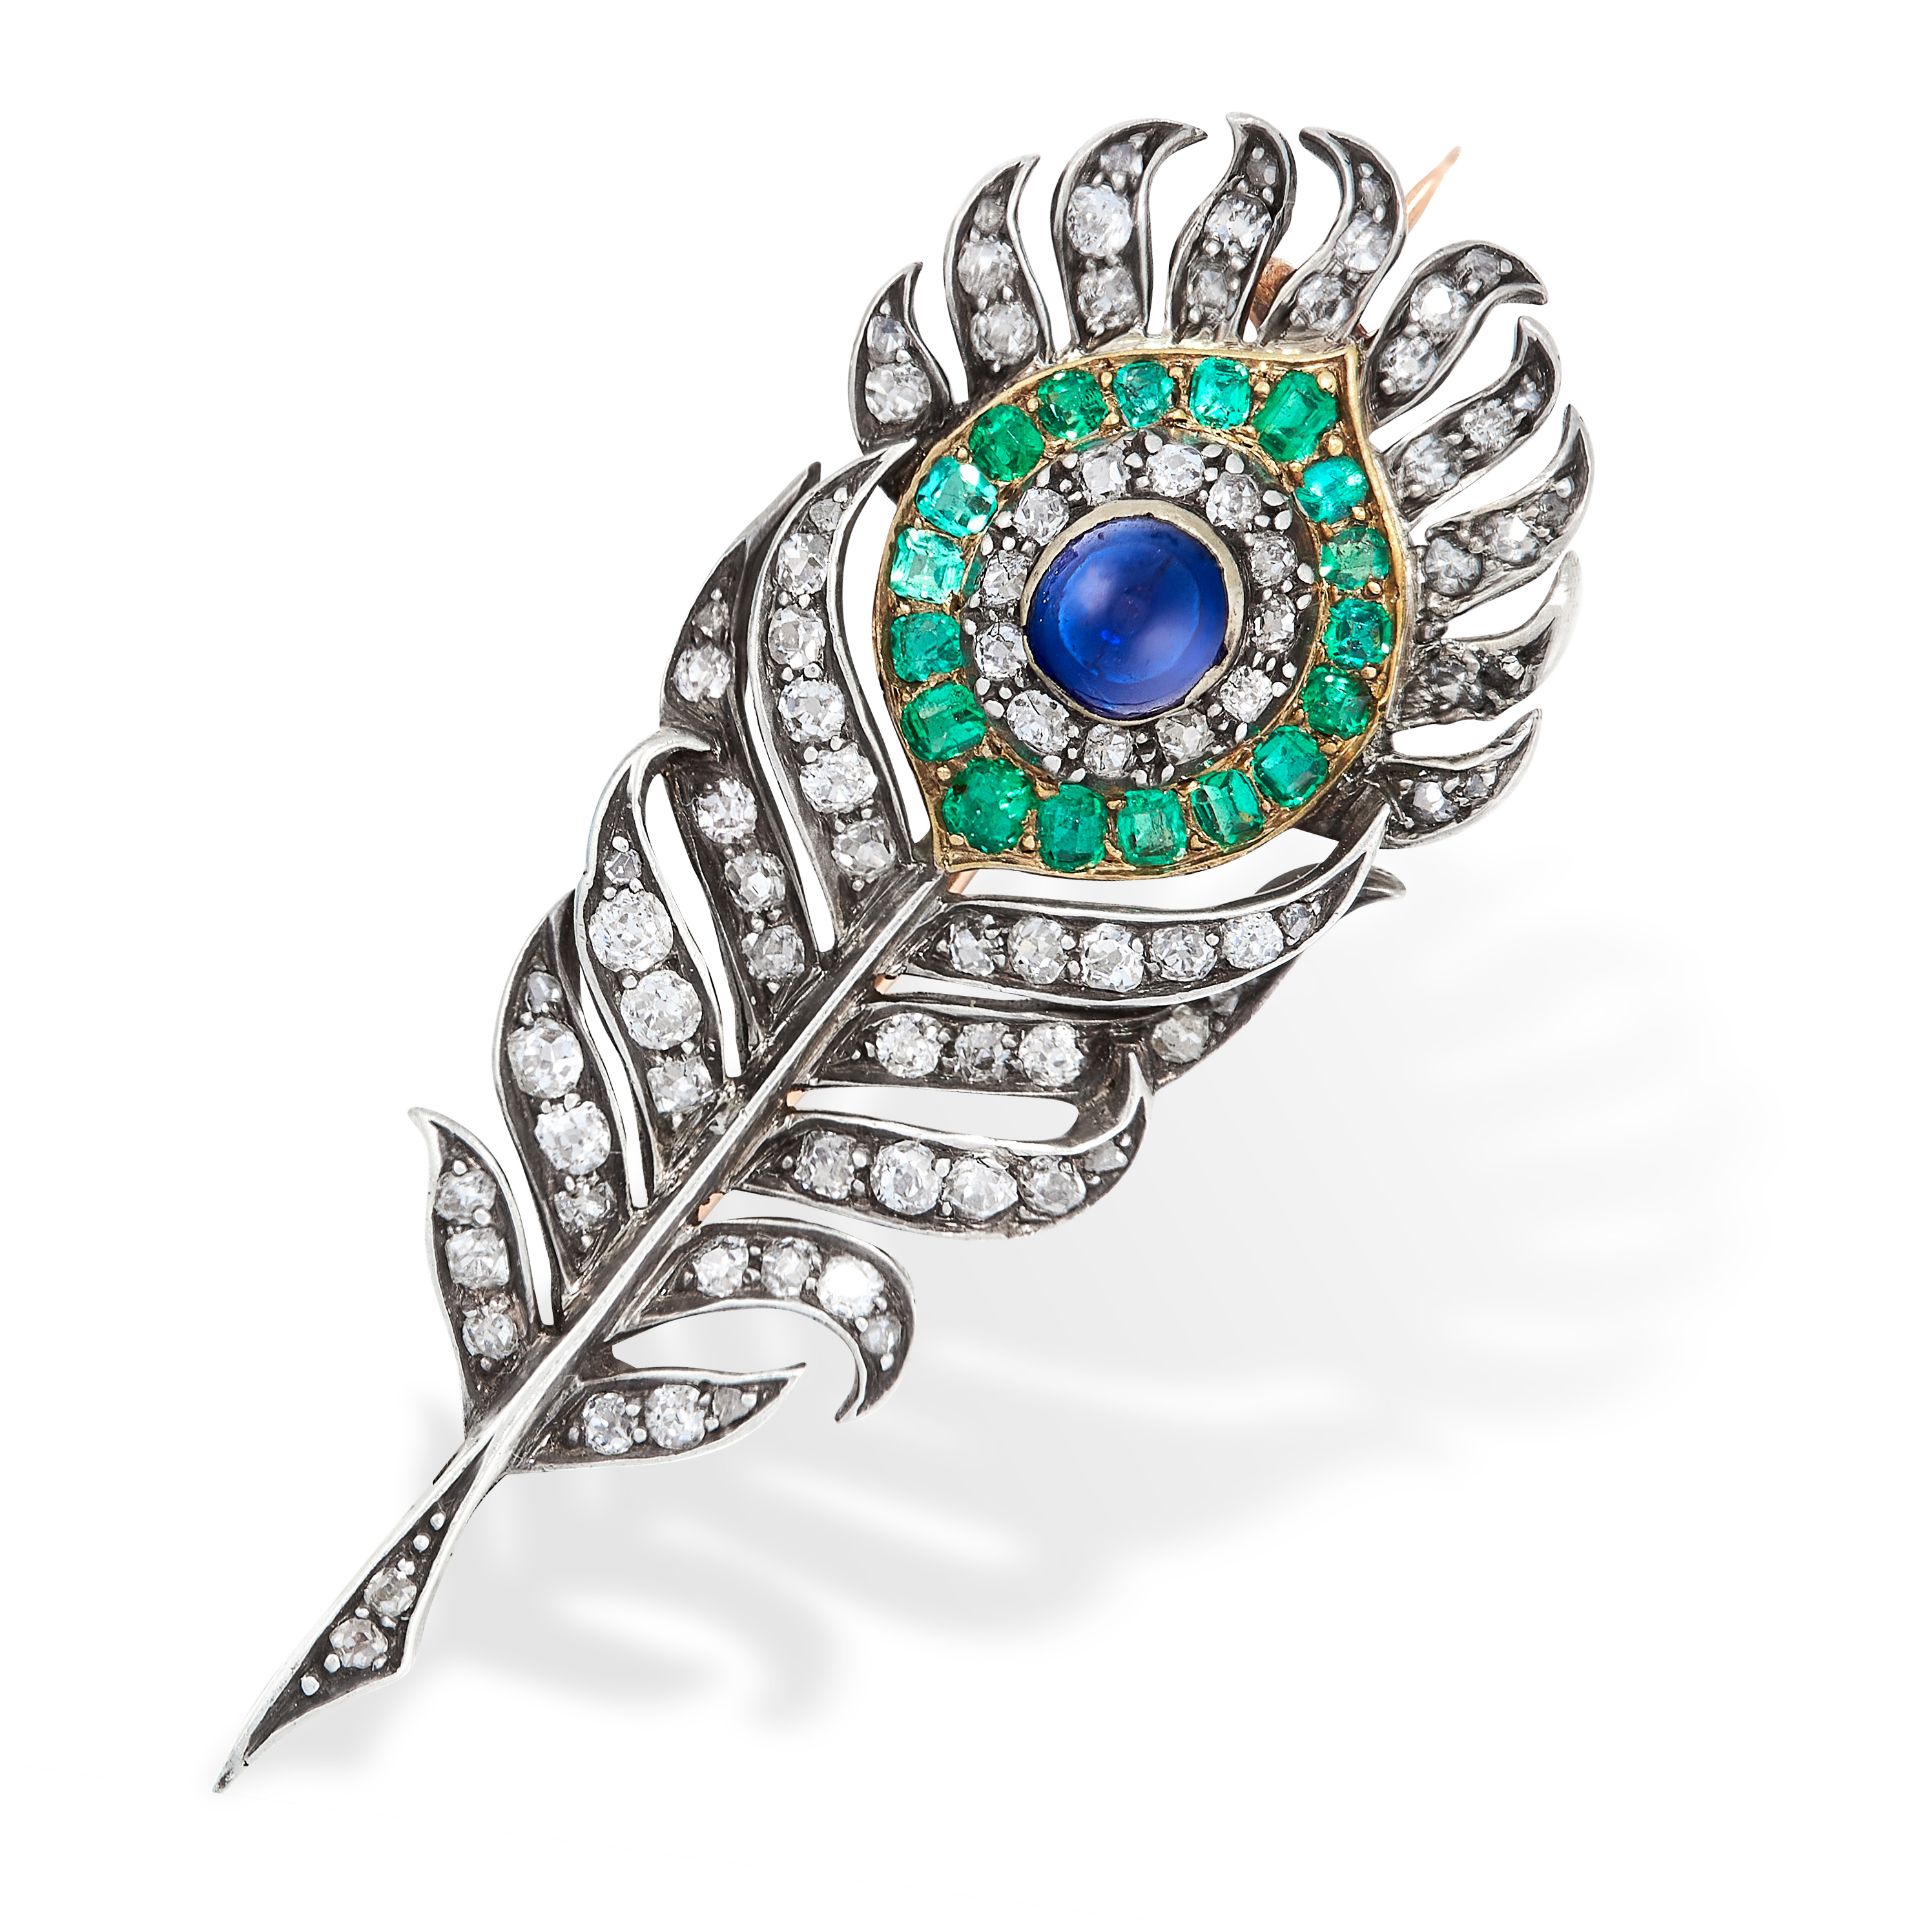 A FINE ANTIQUE SAPPHIRE, EMERALD AND DIAMOND PEACOCK FEATHER BROOCH, LATE 19TH CENTURY in yellow